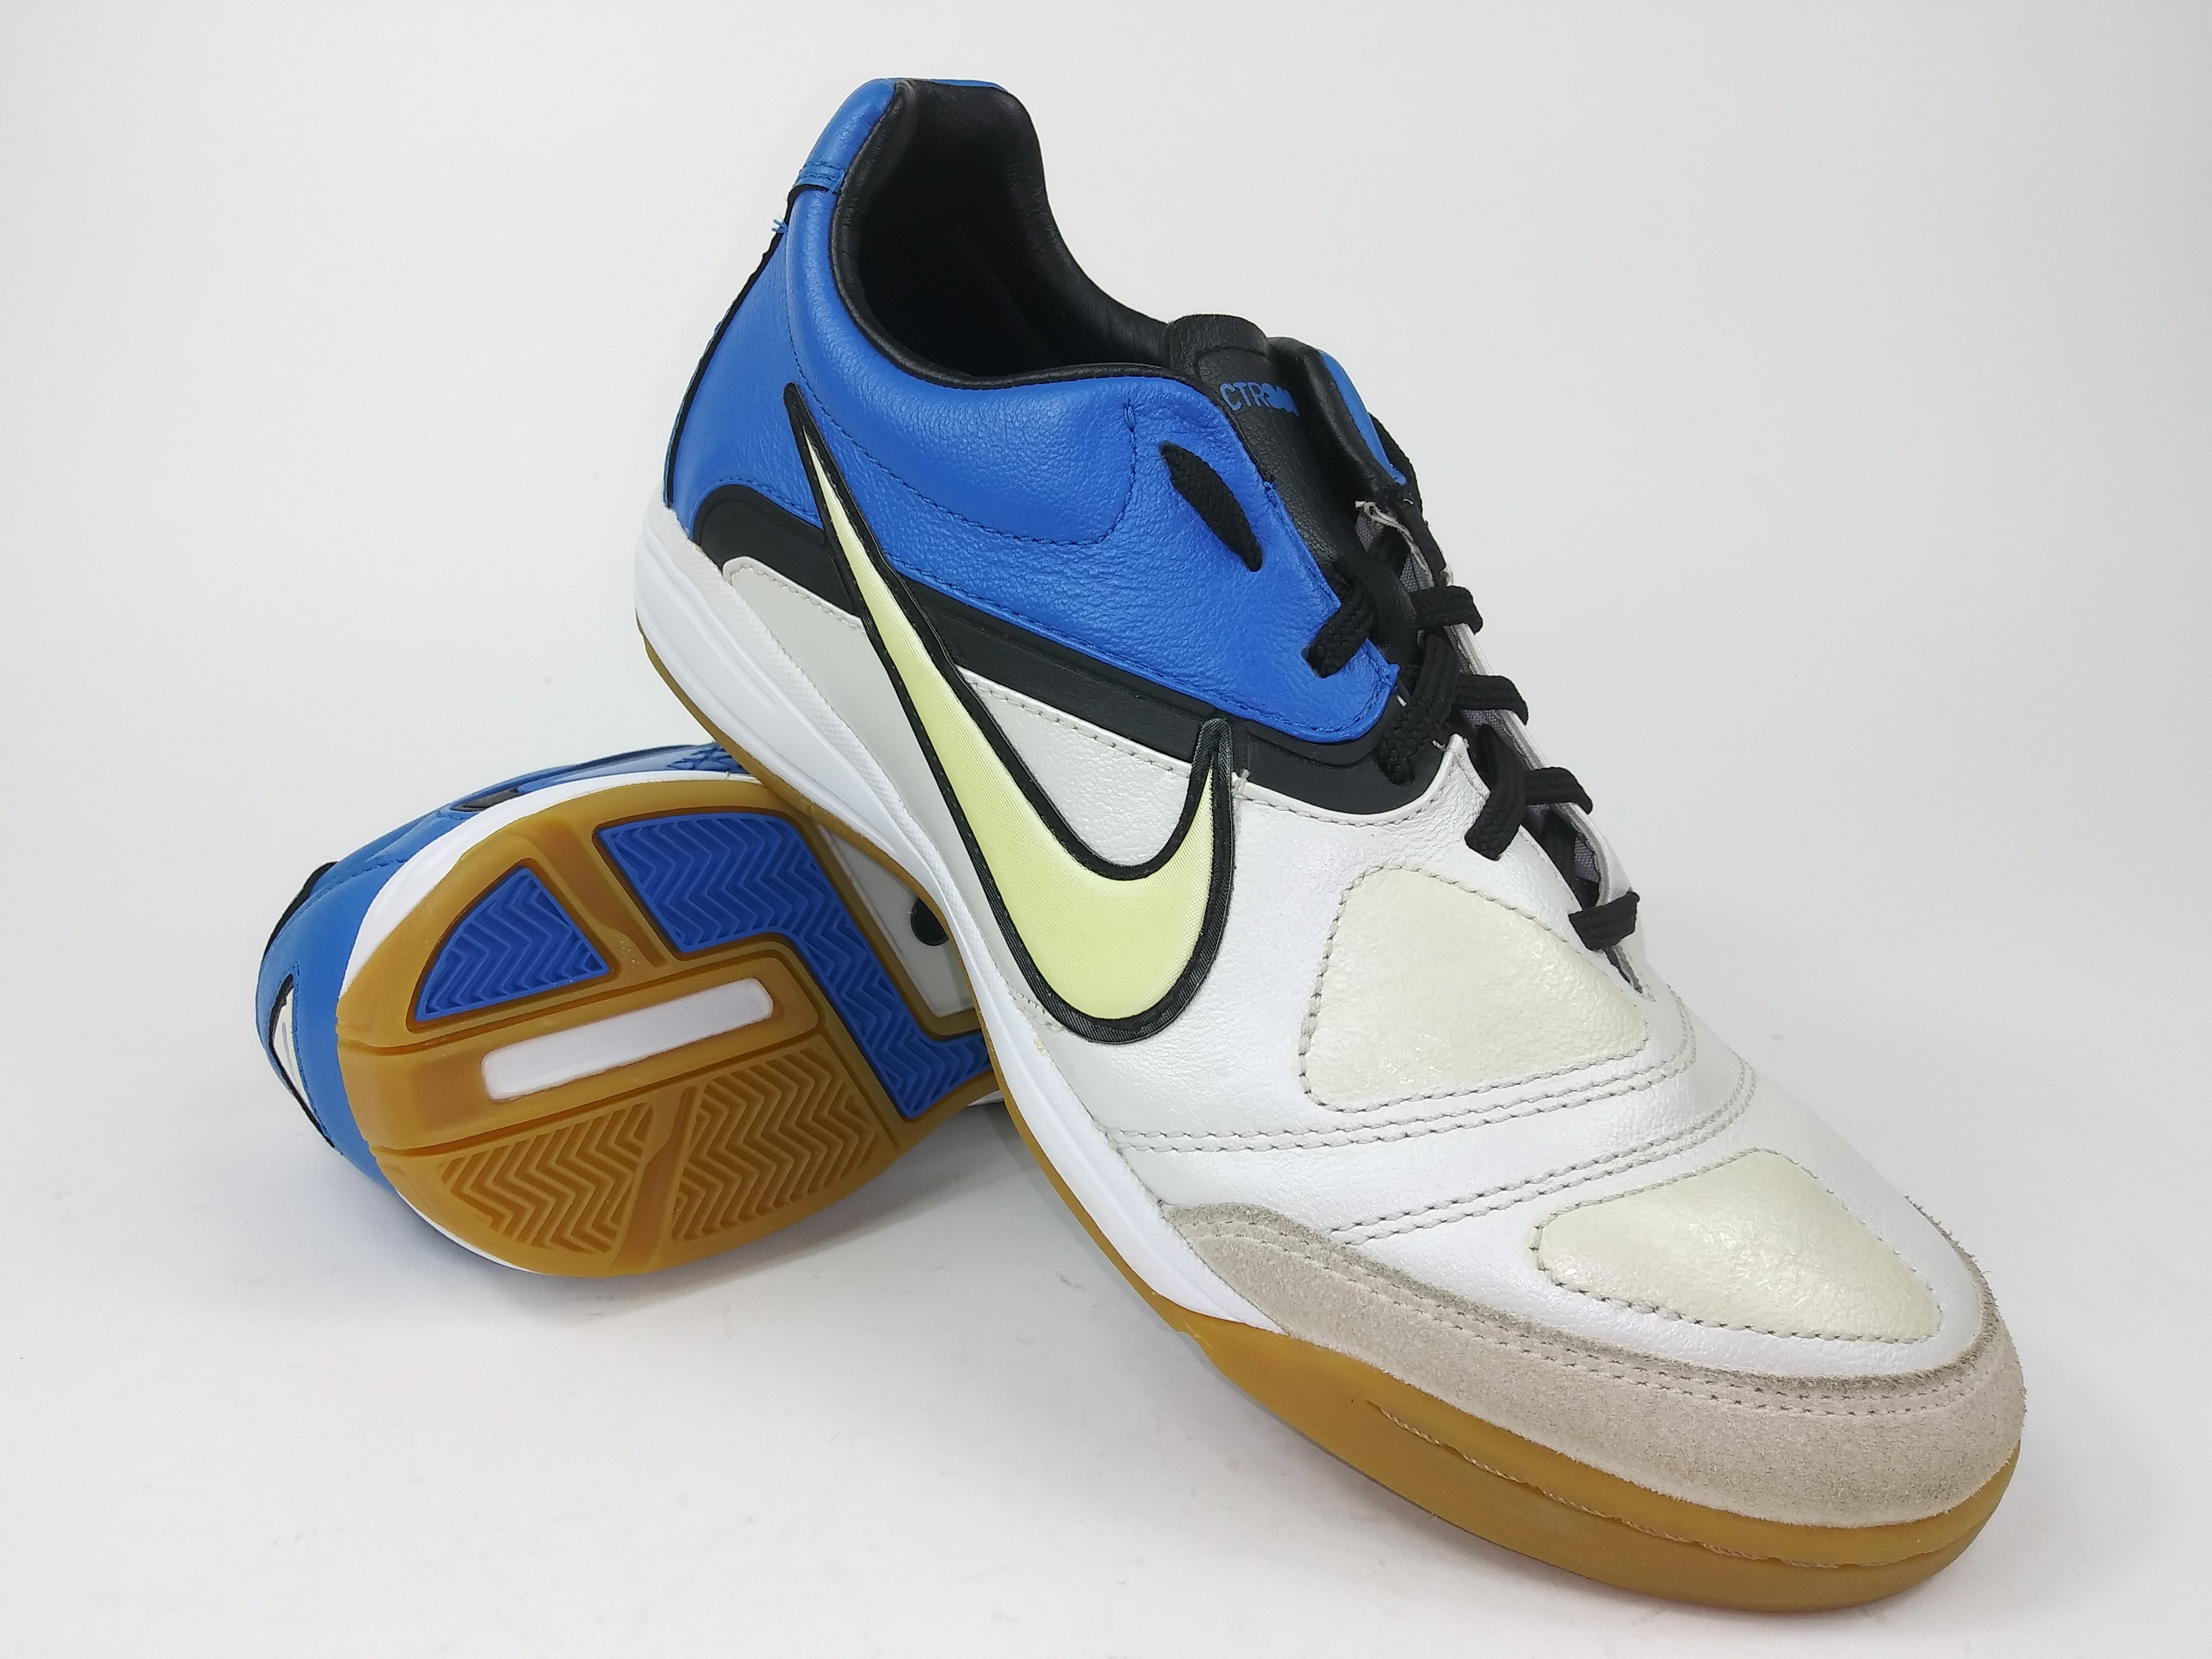 CTR 360 Libretto ll IC Indoor Shoes White Blue – Villegas Footwear